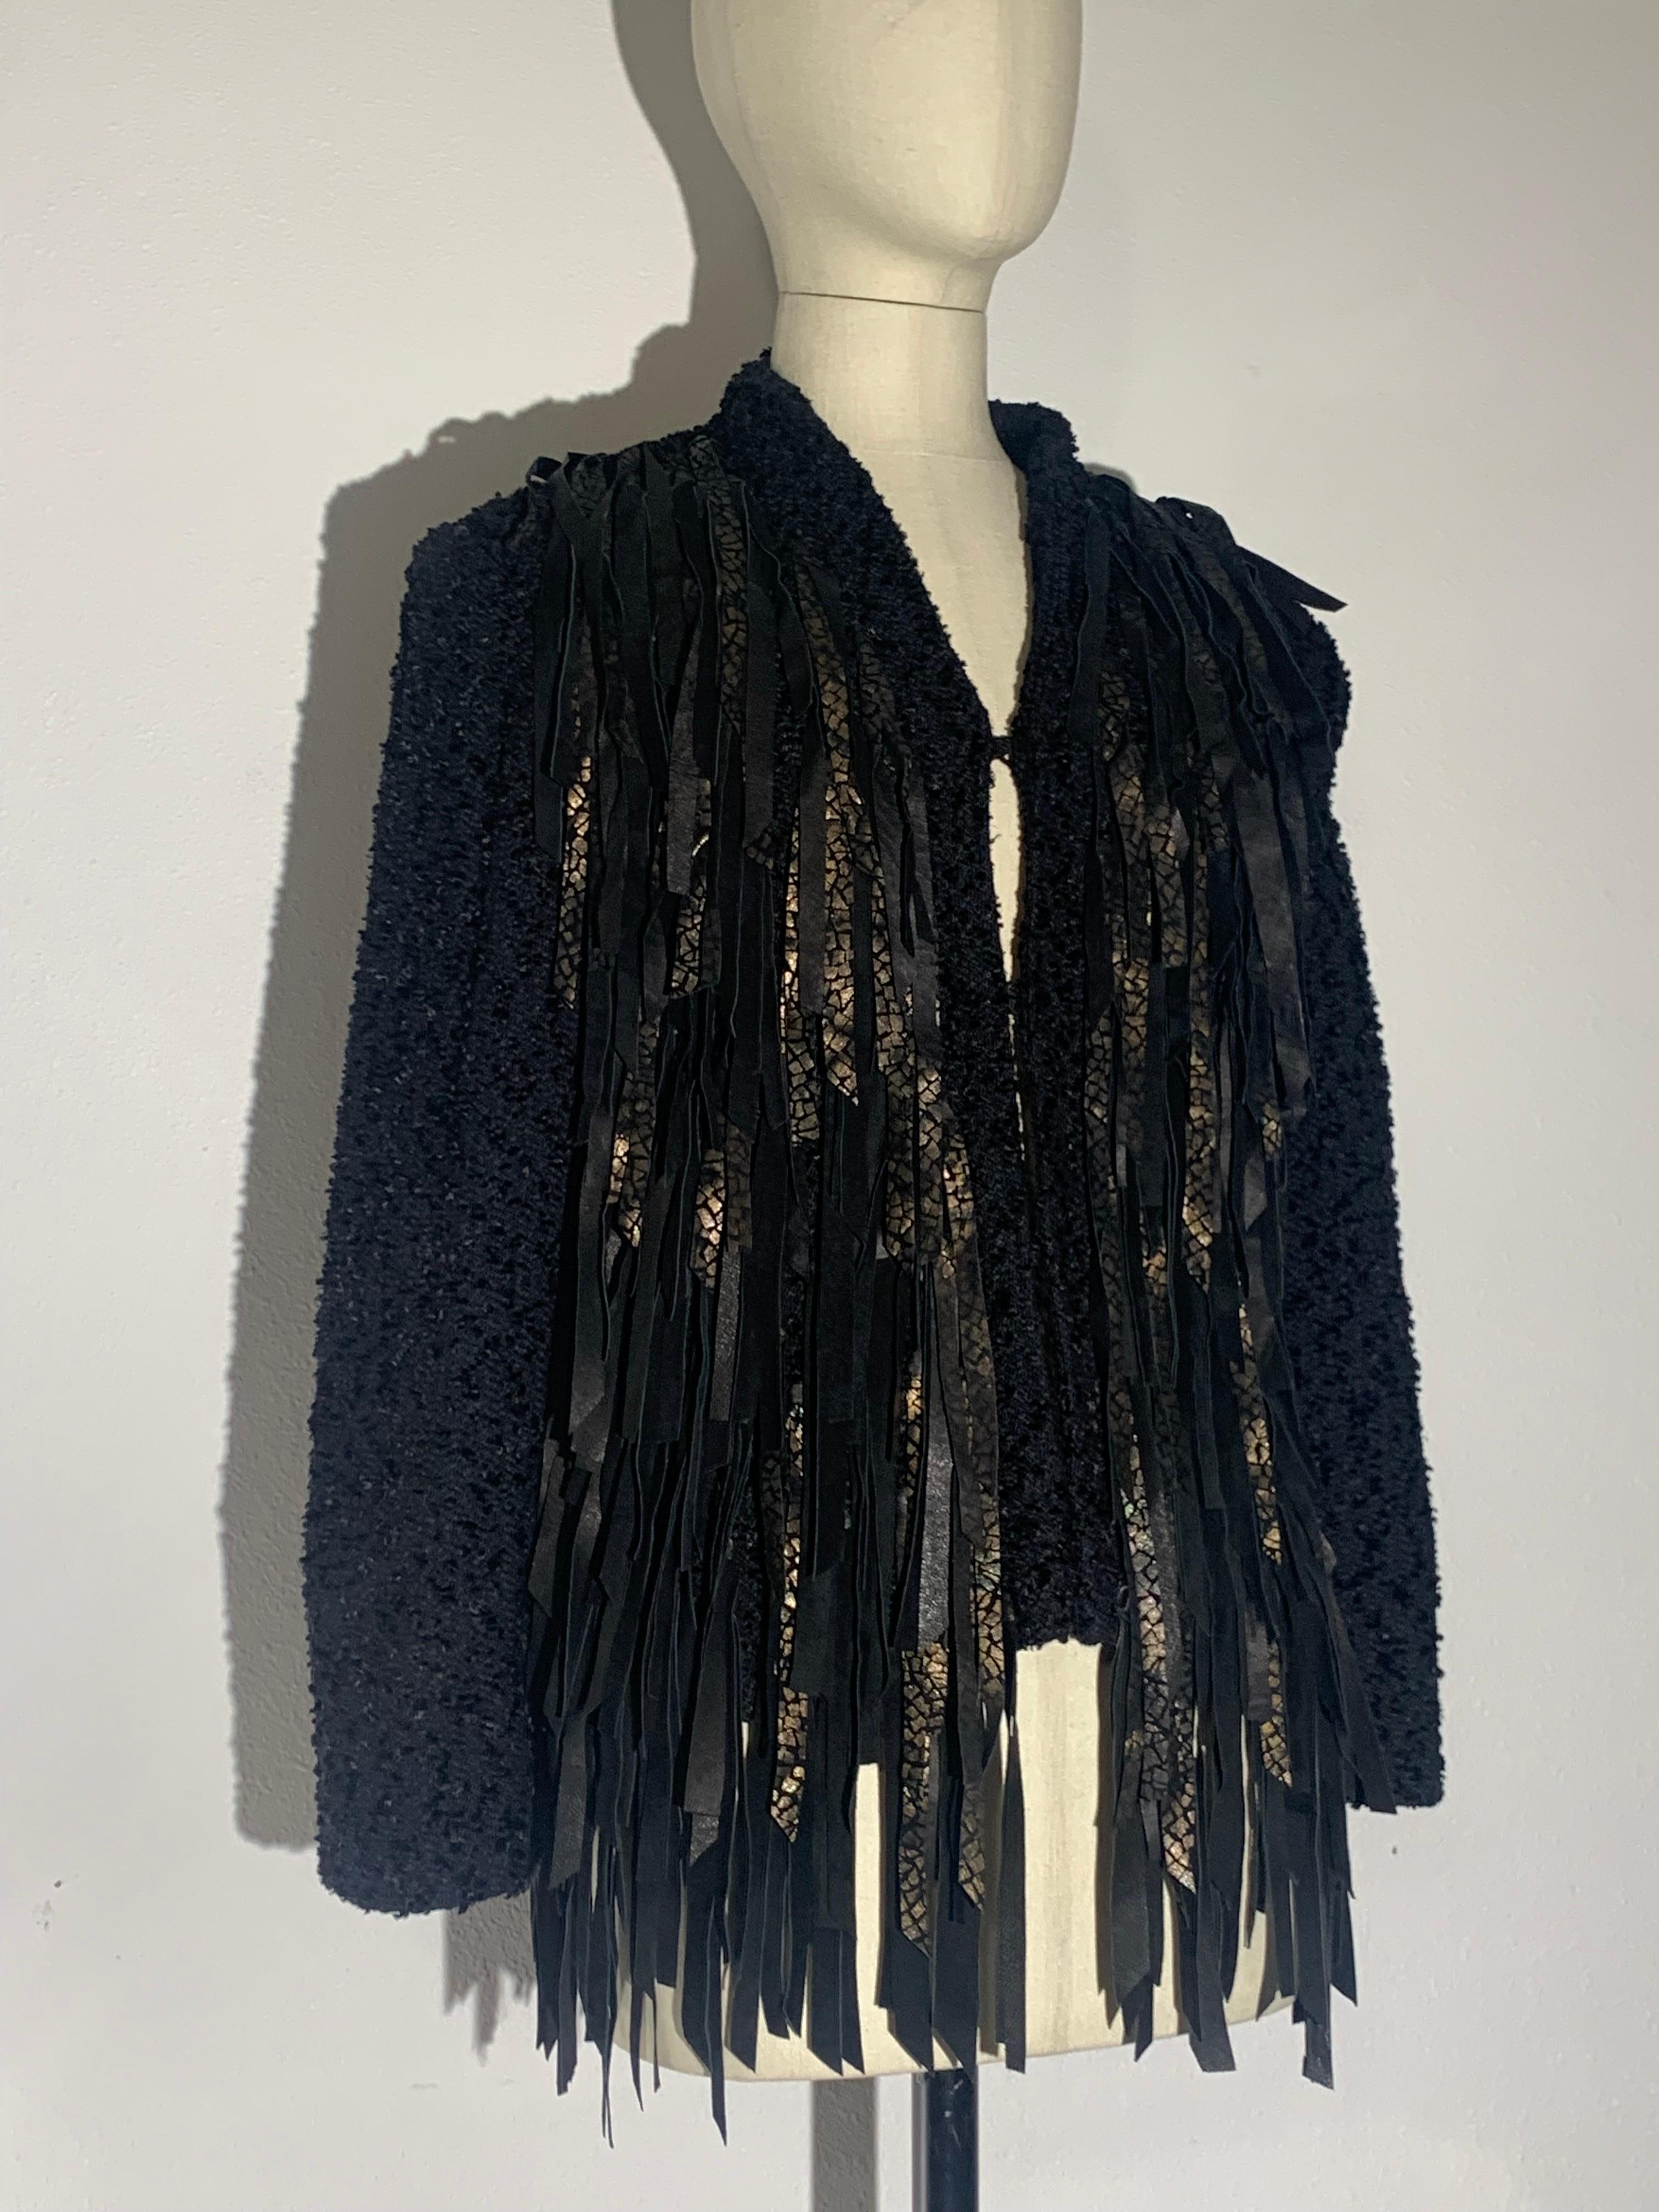 Kathleen Weir West Art-To-Wear Handwoven Black Boucle & Suede Fringed Jacket: Western - inspired black and gold stamped suede fringe covering entire front and back. Banded collar. Lined in silk/rayon crepe. Hook and eye closures at front. No